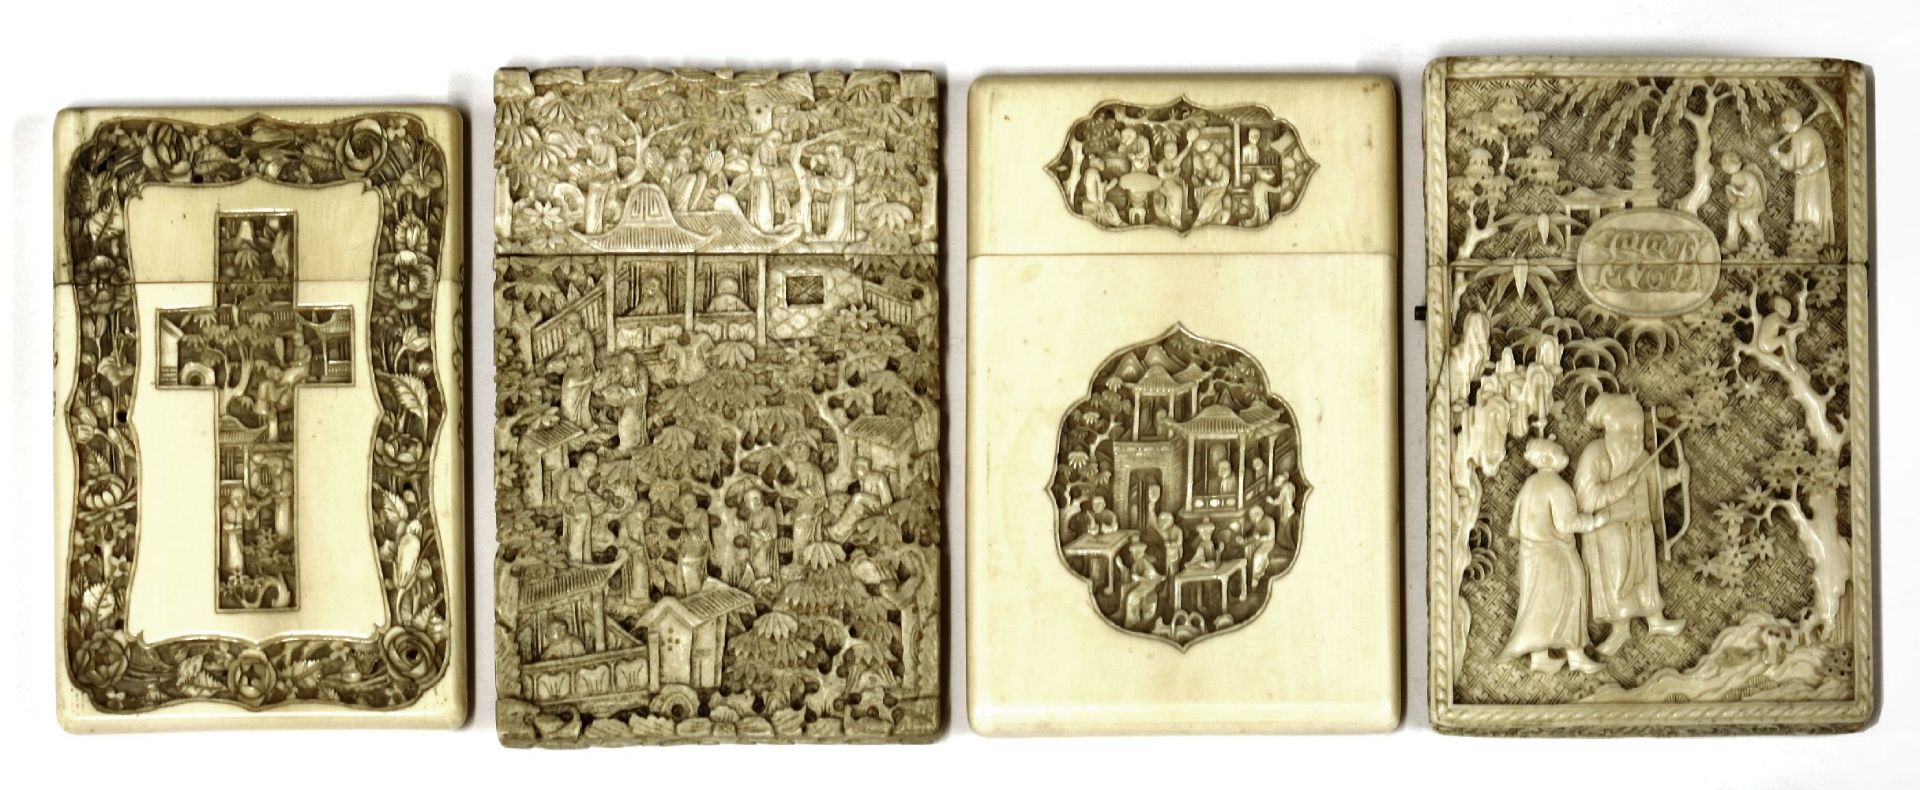 Four ivory cases,carved with figures in landscapes, pagodas, trees and foliage, one with crosses - Bild 2 aus 2